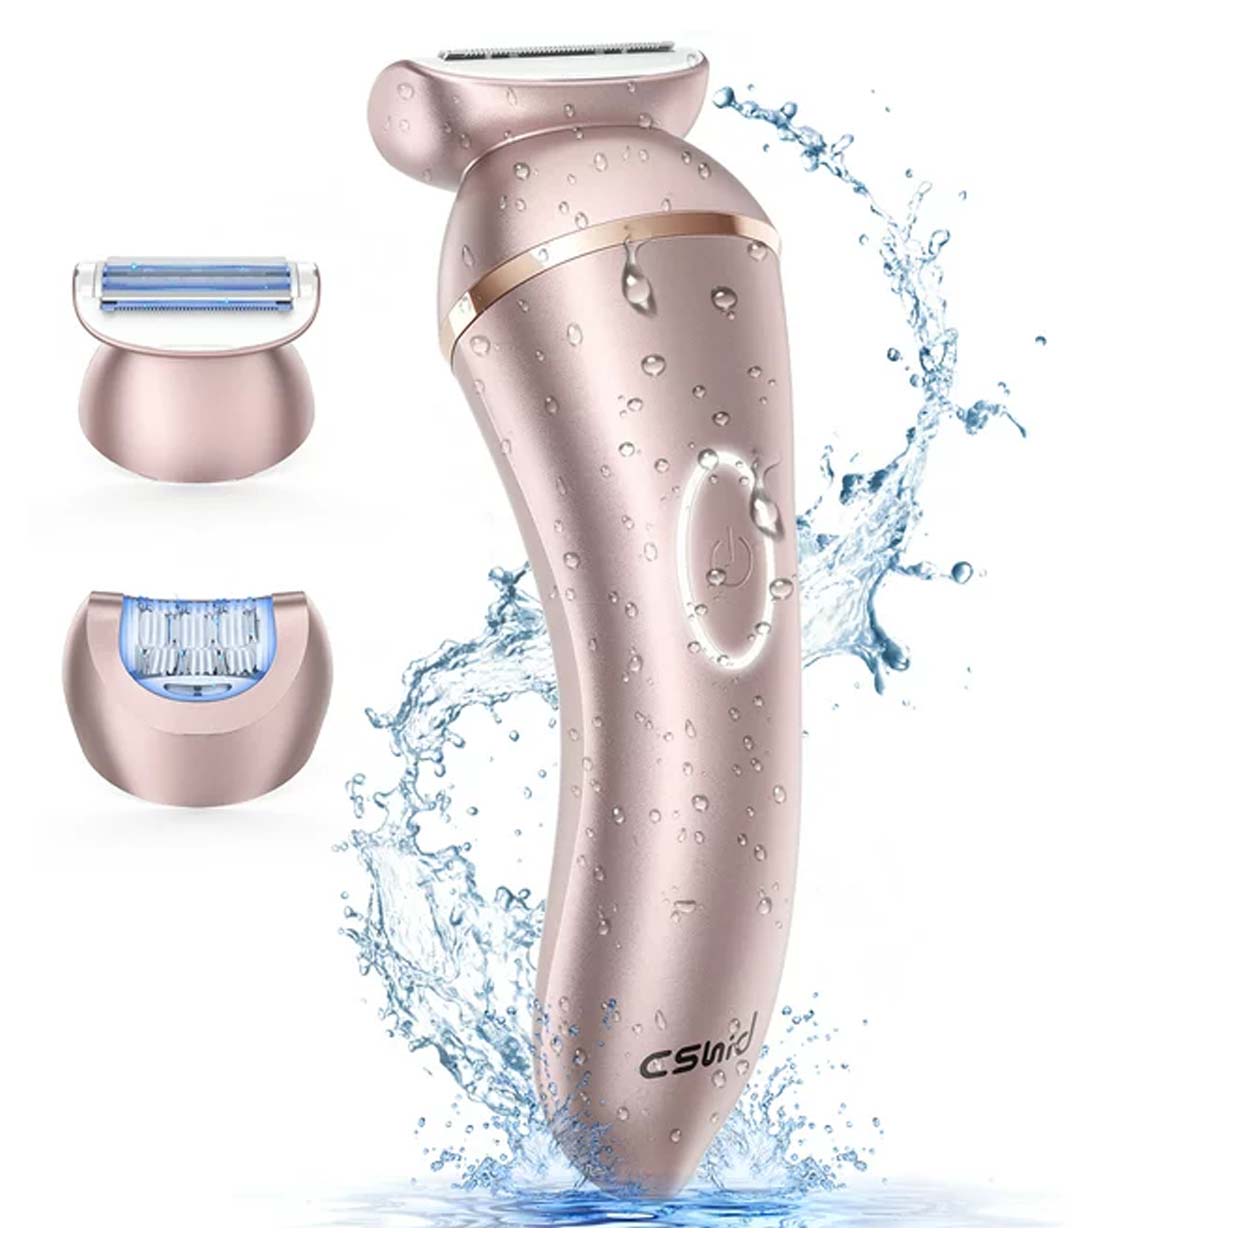 2 in 1 Women's Electric Shaver IPX6 Waterproof Wet & Dry in blush with attachments